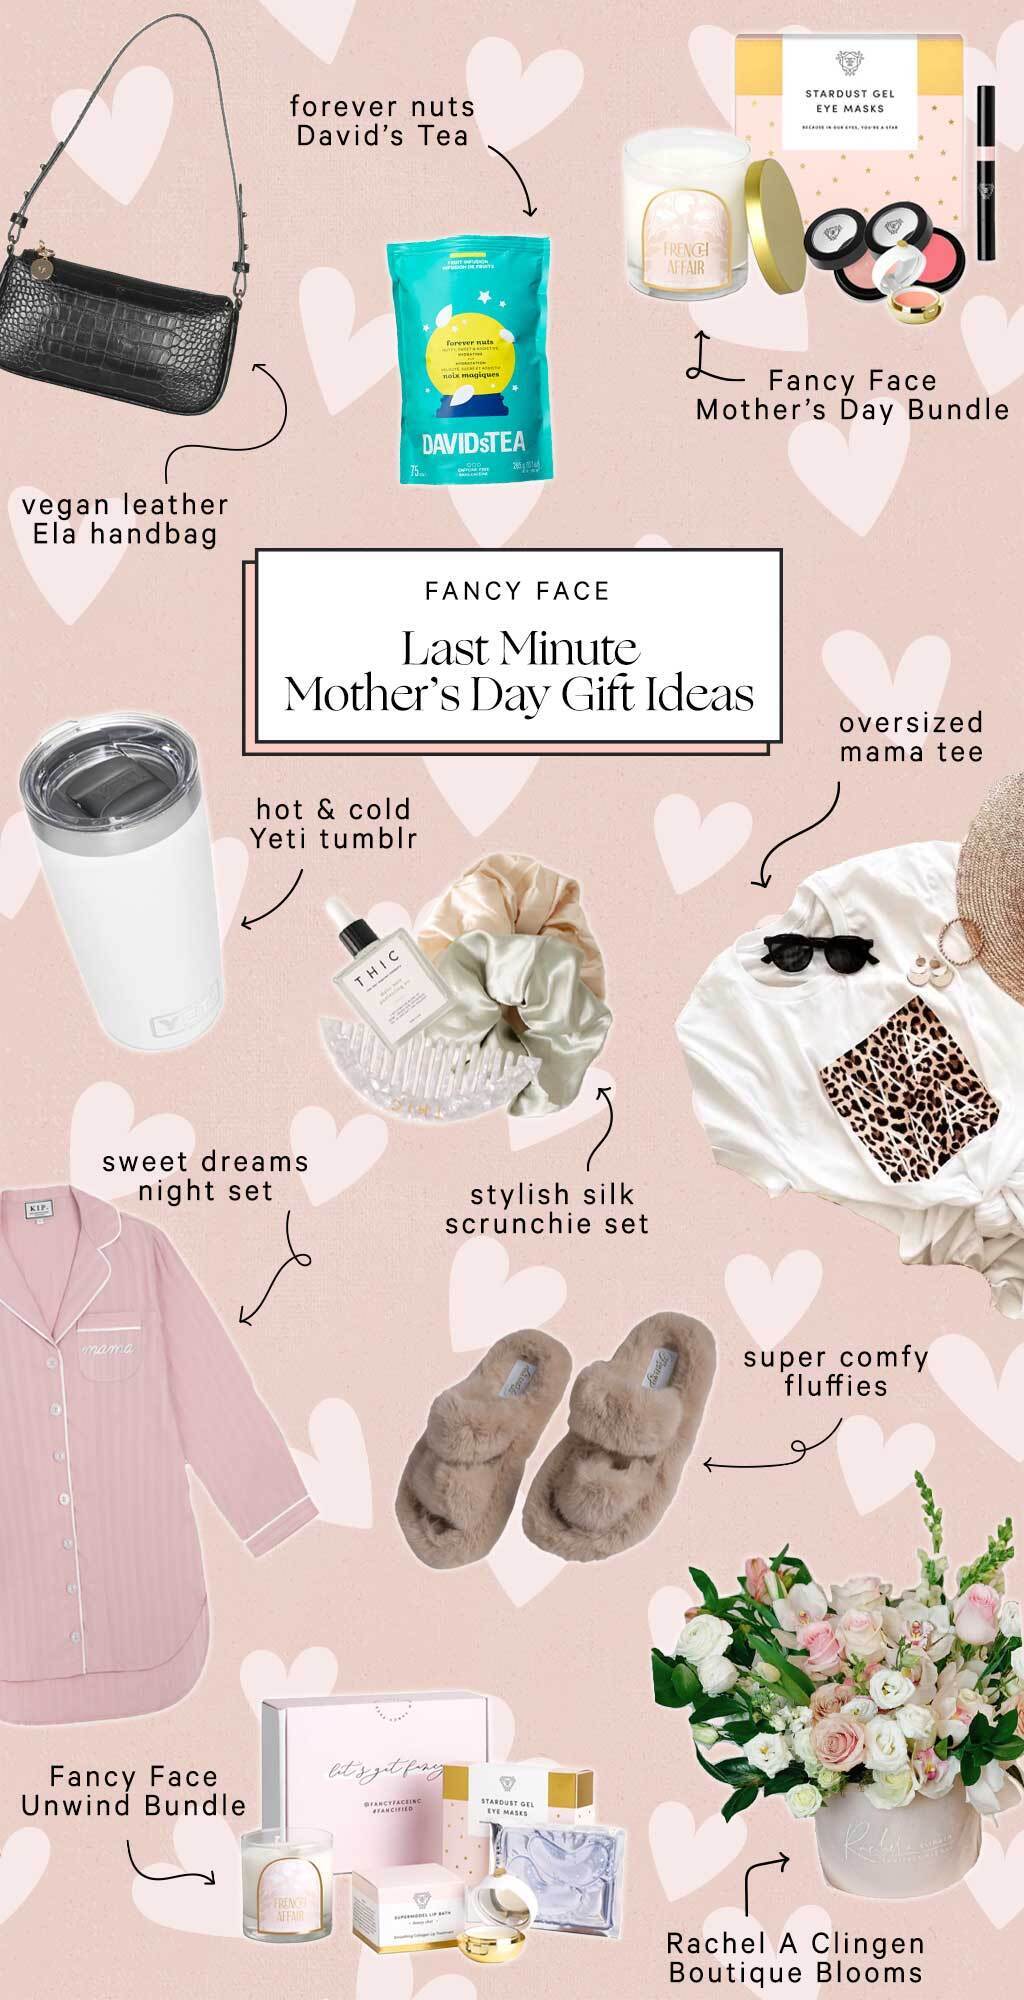 Last Minute Mother's Day Gift Ideas, Fancy Face Inc.